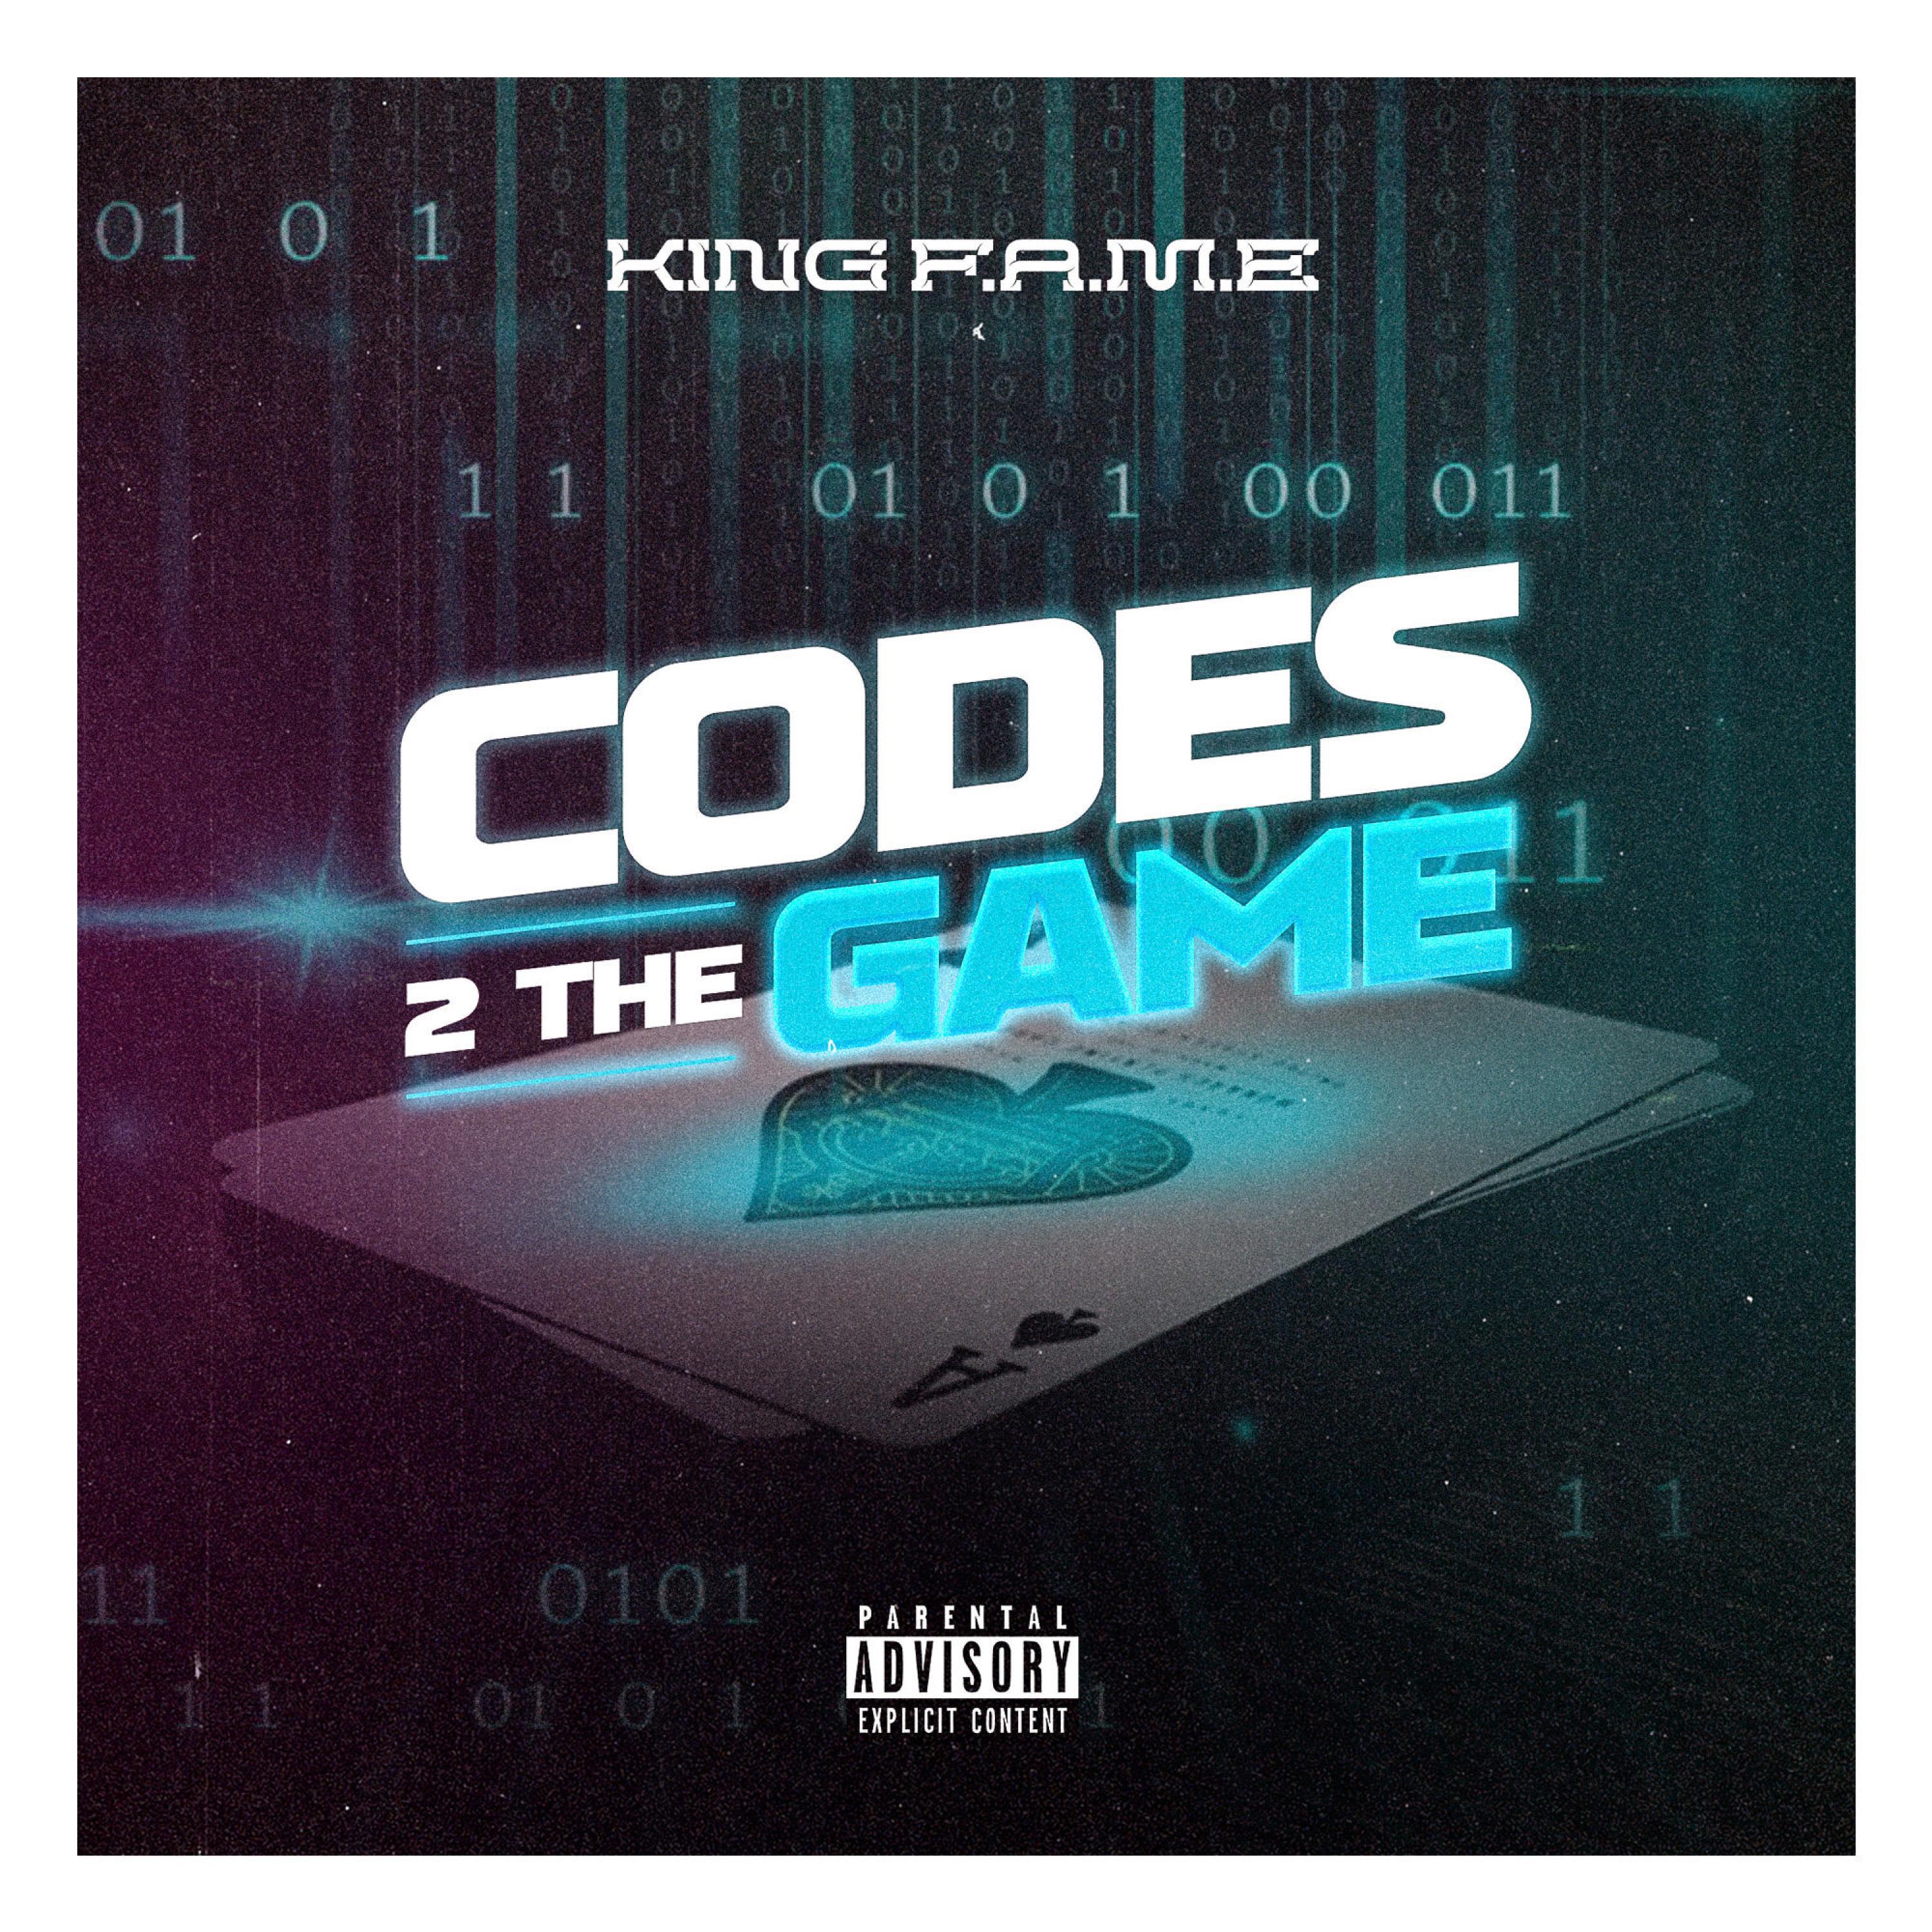 King Fame - Codes 2 the Game